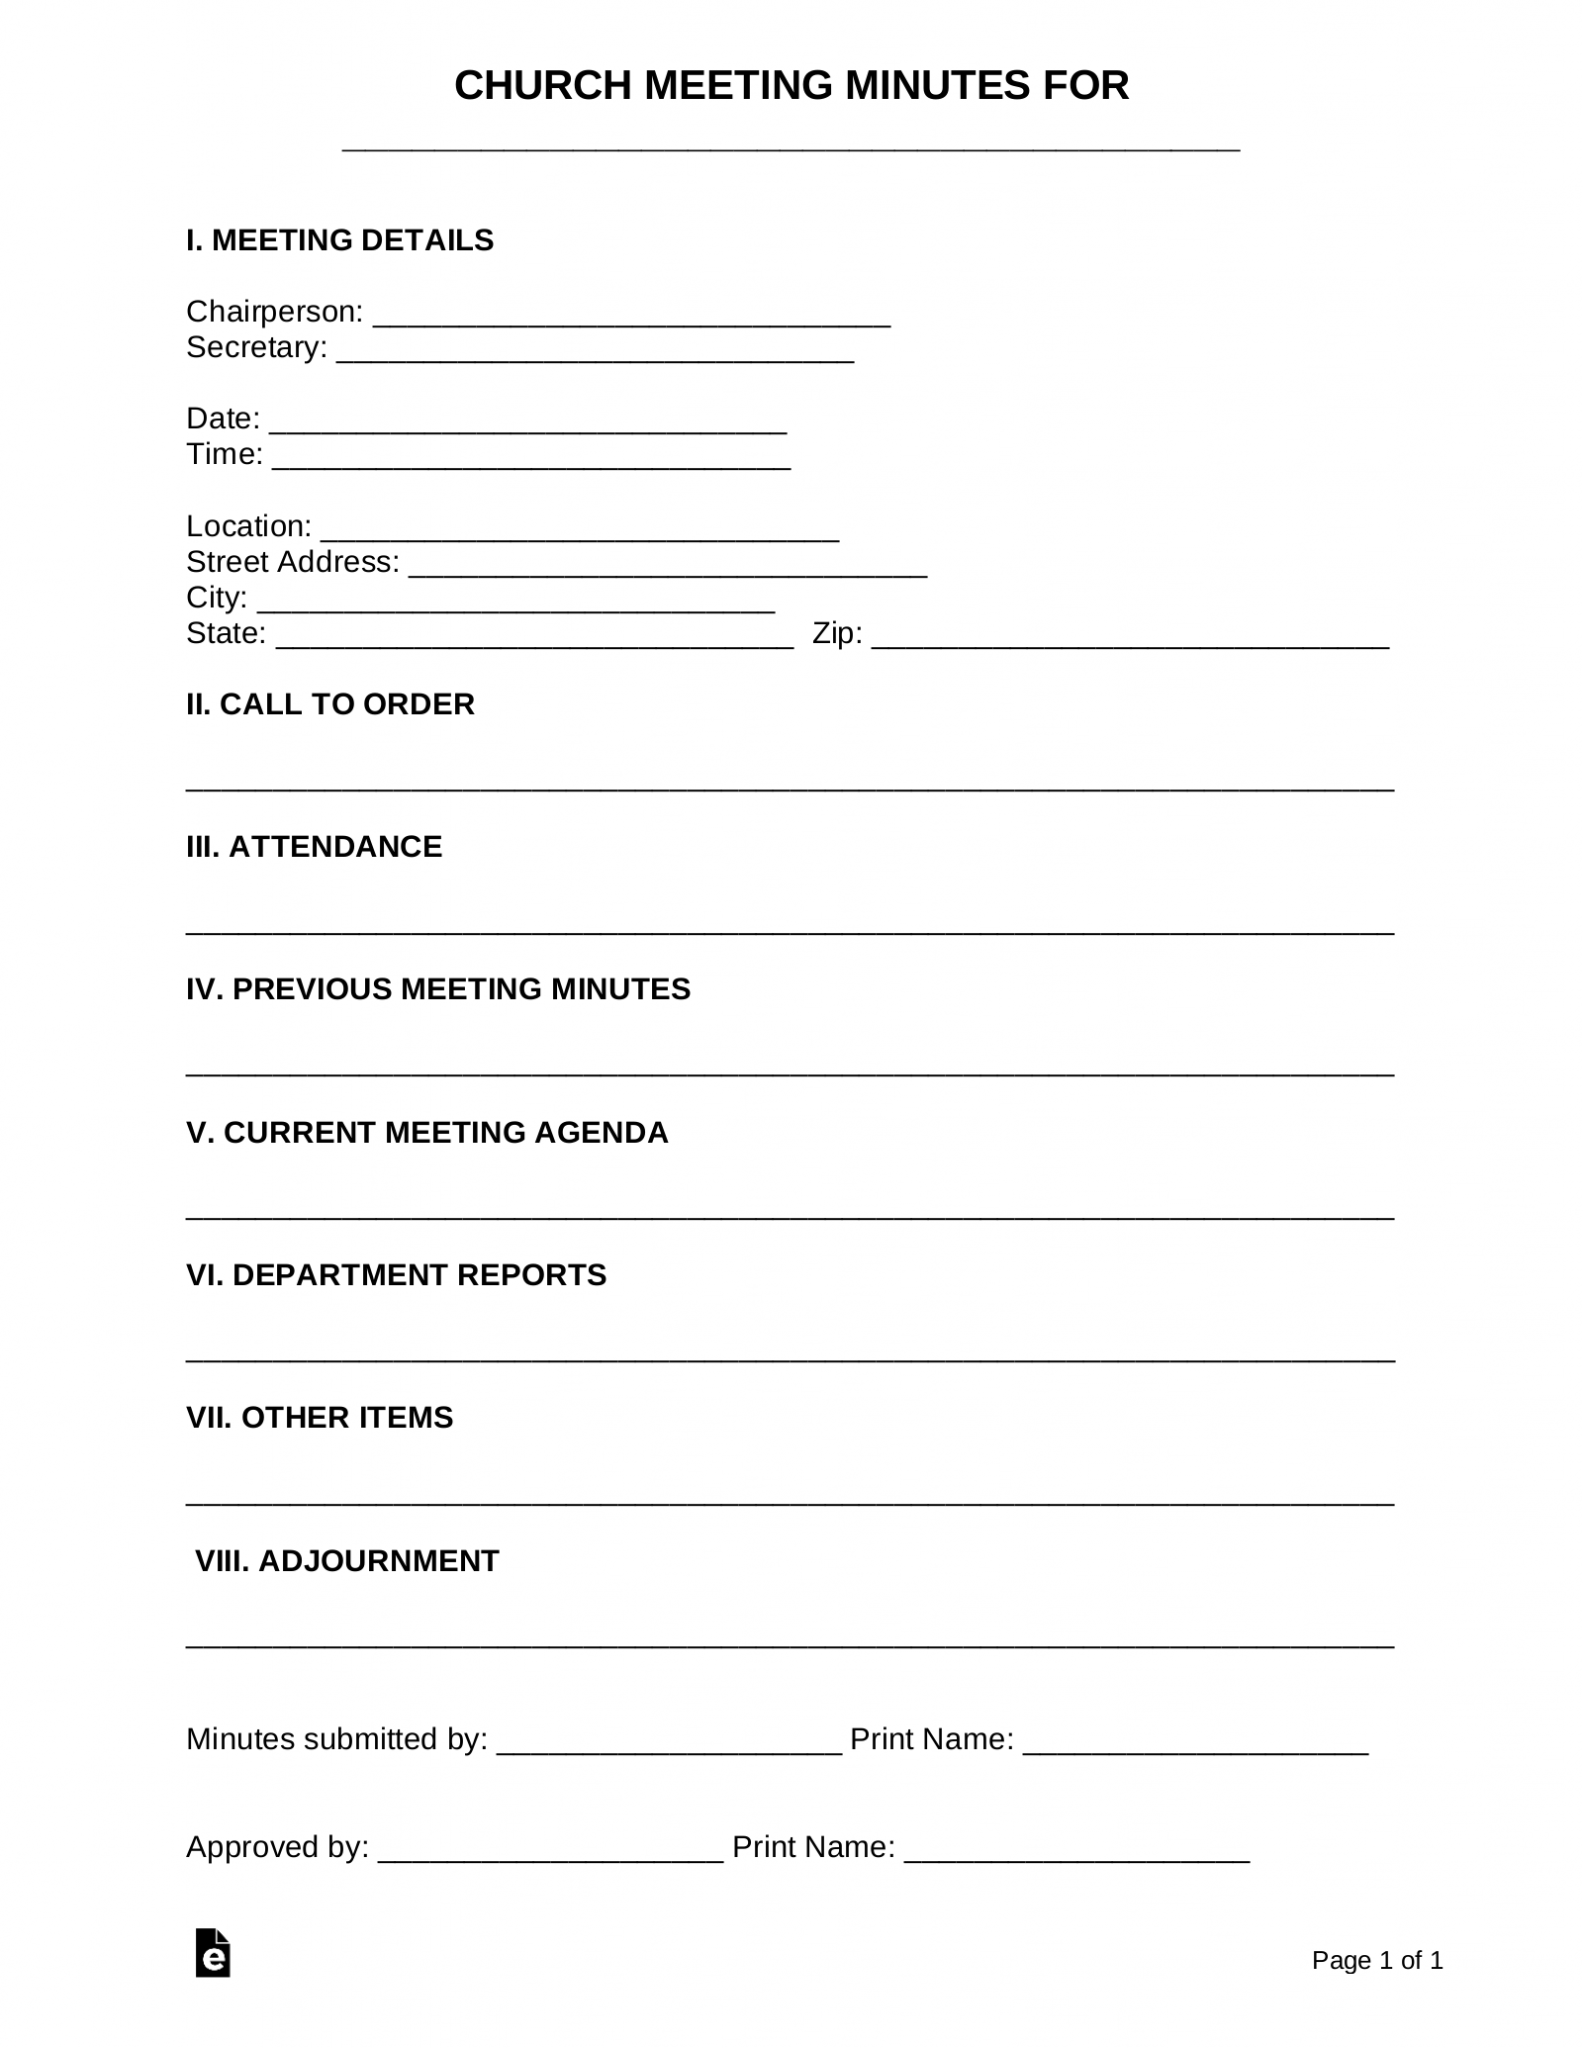 free-church-meeting-minutes-template-sample-word-pdf-eforms